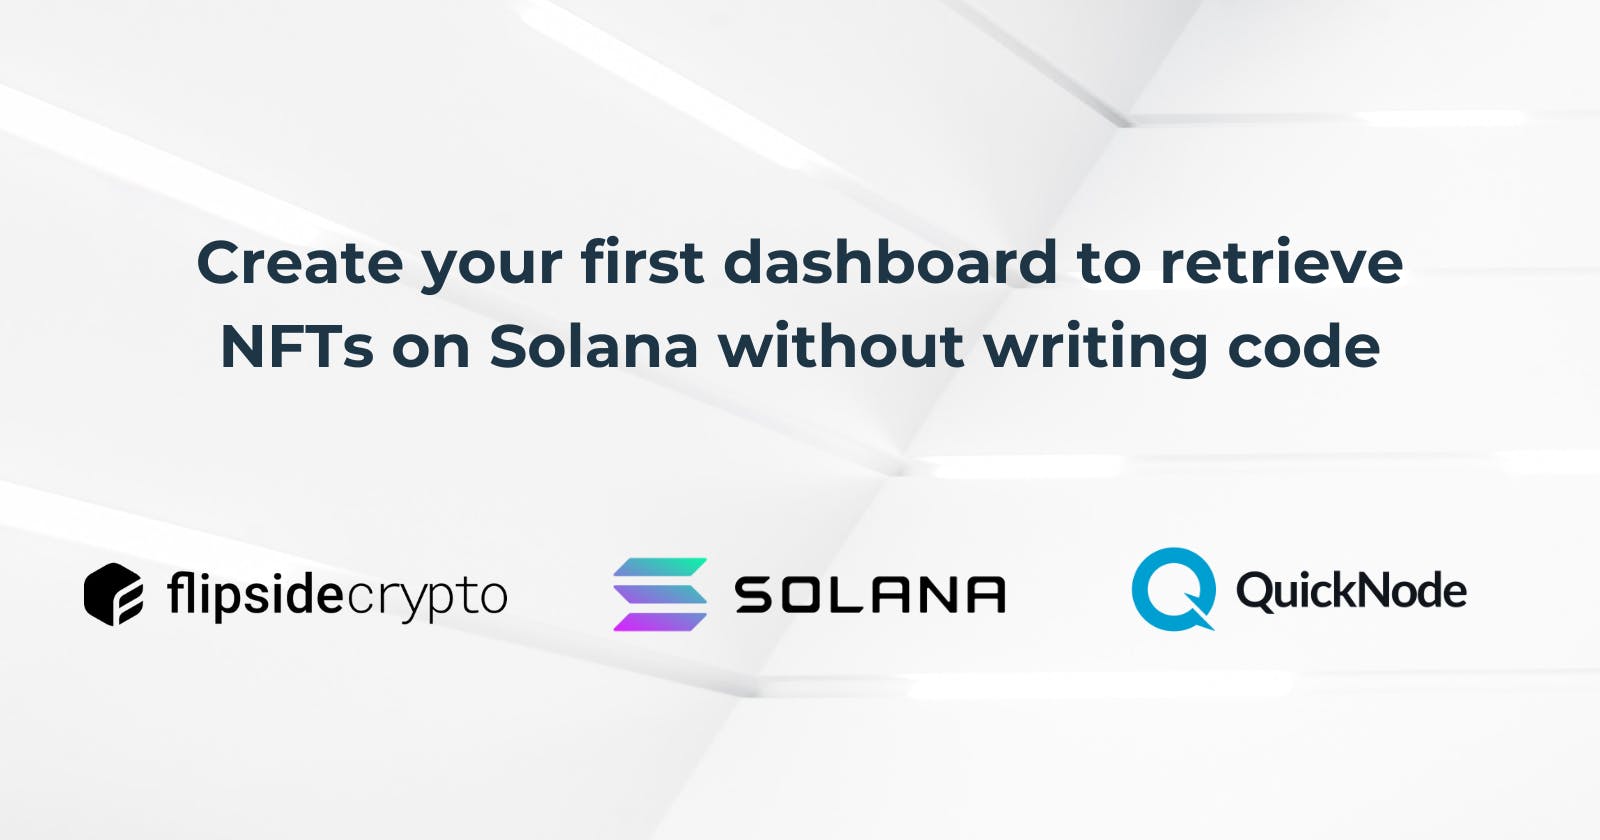 Create your first dashboard to retrieve NFTs on Solana without writing code